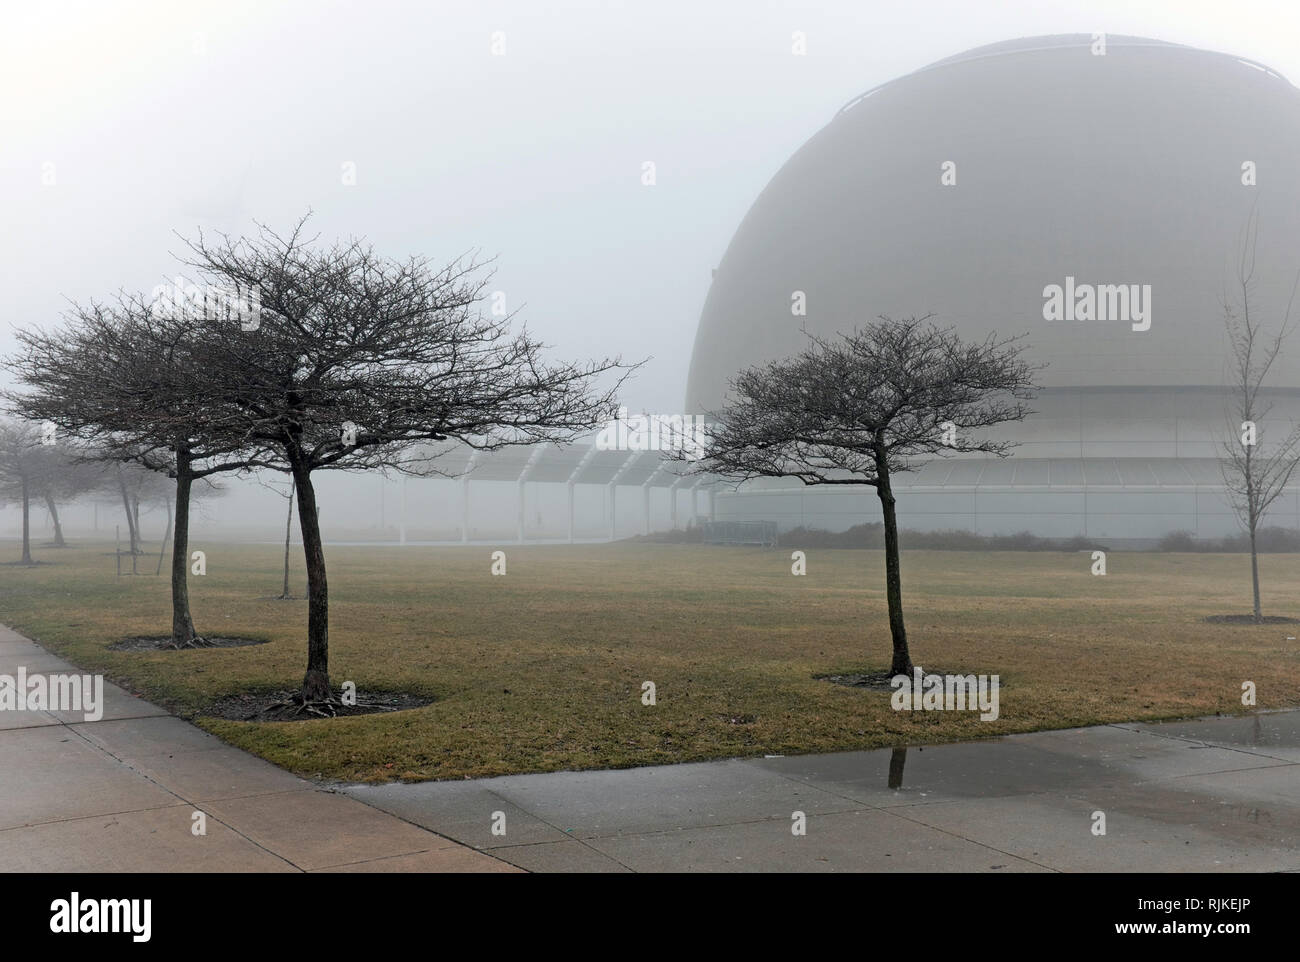 Cleveland, Ohio, USA. 6th Feb, 2019.  The Cleveland Clinic IMAX dome theater at the Great Lakes Science Center in Cleveland Ohio USA, stands out in the fog shrouded north coast harbor winter landscape.  Credit: Mark Kanning/Alamy Live News. Stock Photo